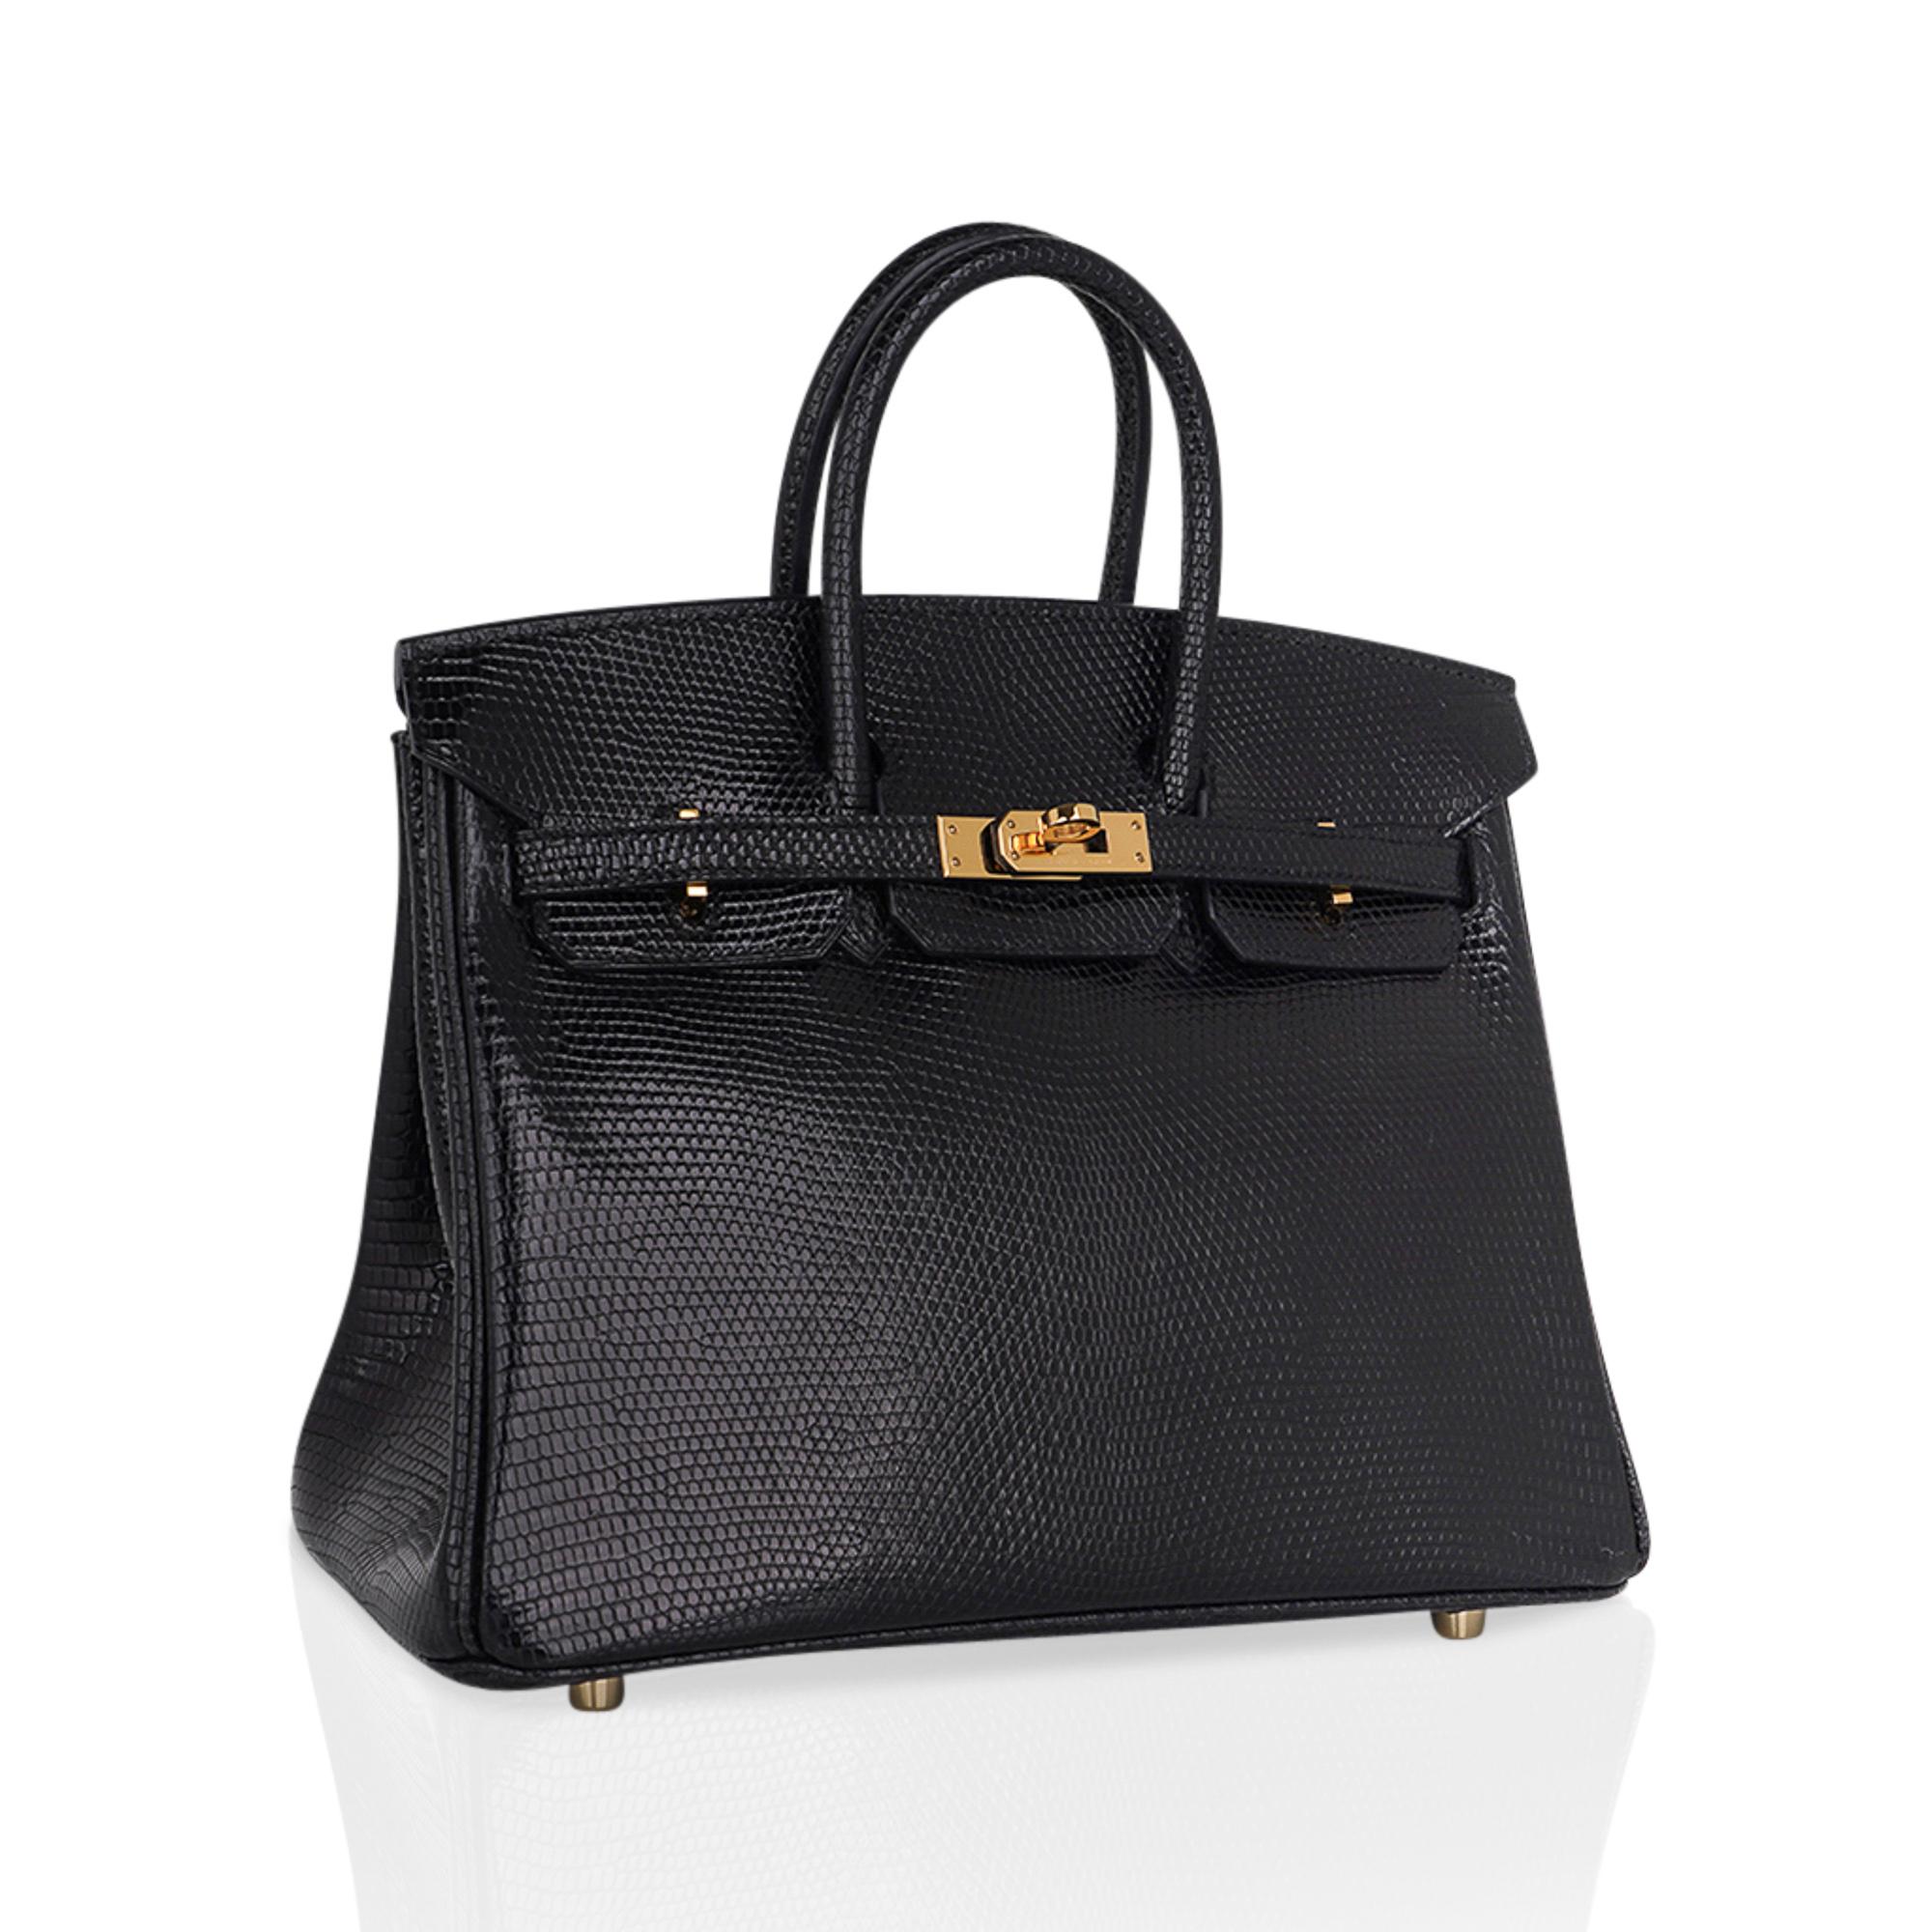 Mightychic offers a limited edition Hermes Birkin 25 bag featured in  Black Lizard.
This extremely rare Hermes Birkin bag is elegant, timeless and absolutely stunning.
Accentuated with lush Gold hardware.
Comes with the lock, keys, and clochette and